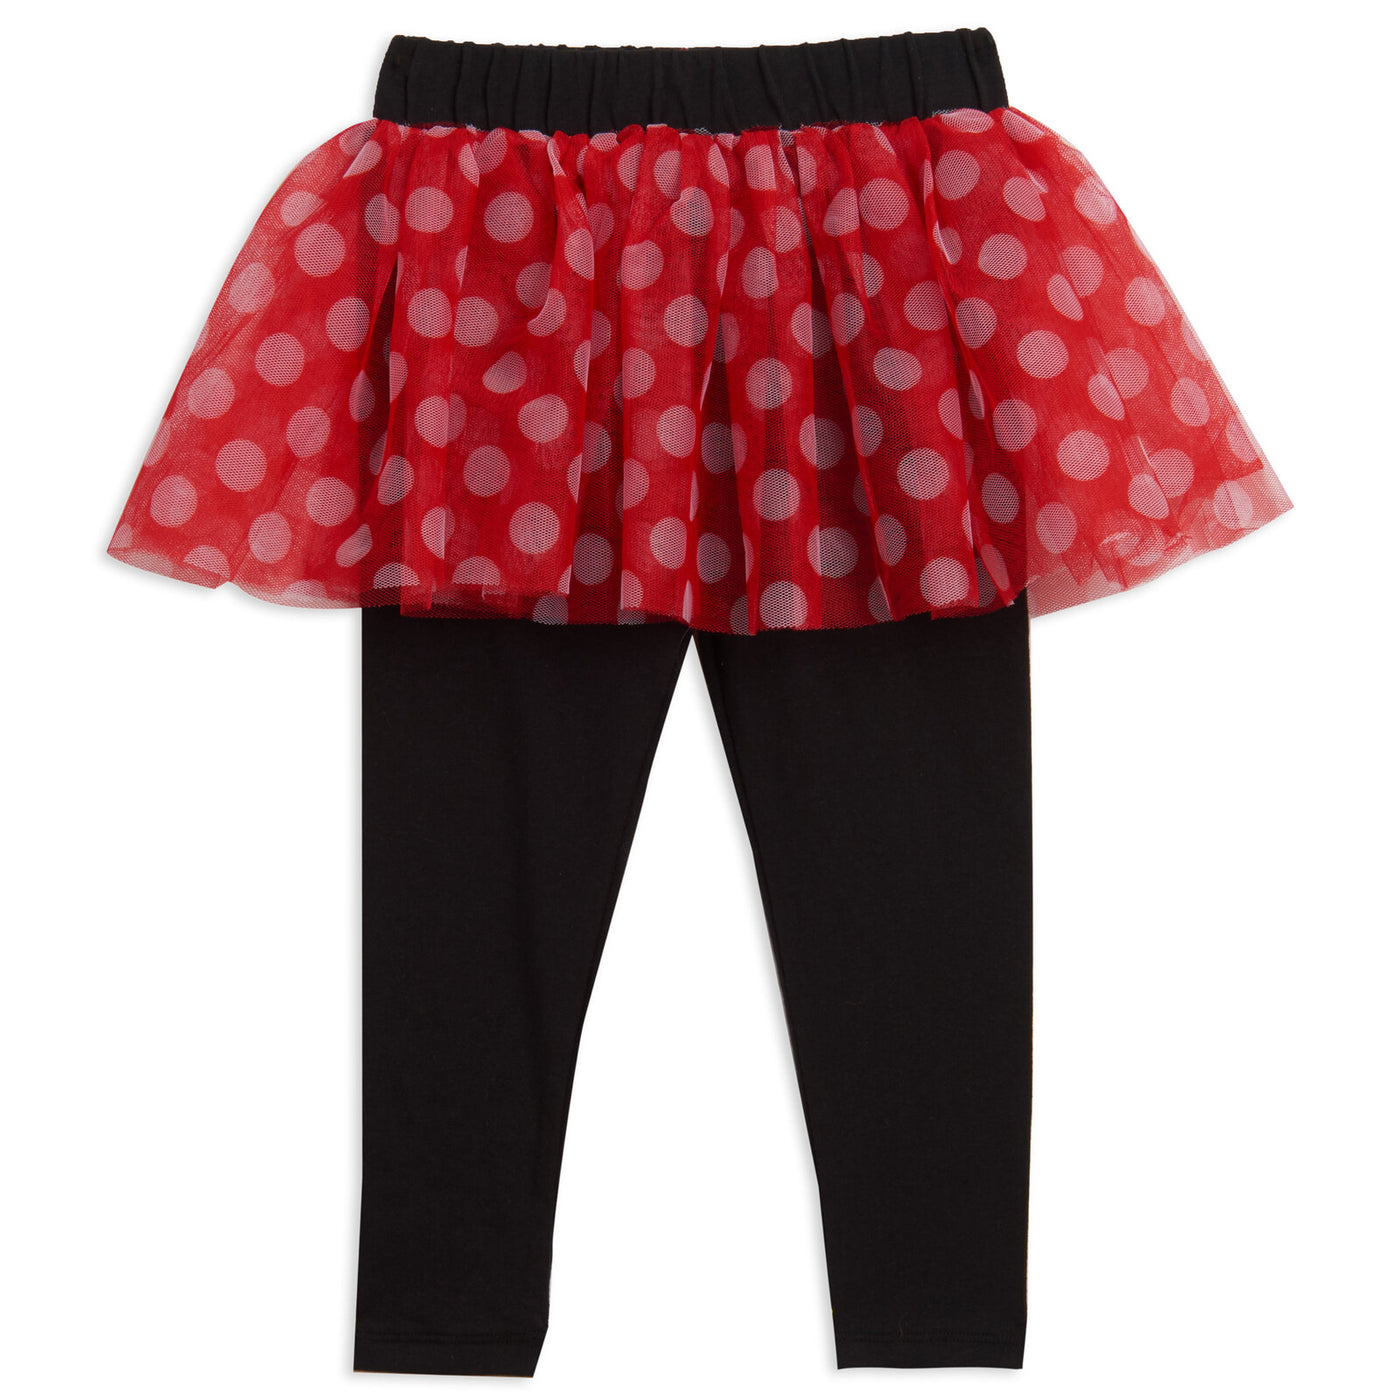 Minnie Mouse T-Shirt Leggings and Headband 3 Piece Outfit Set